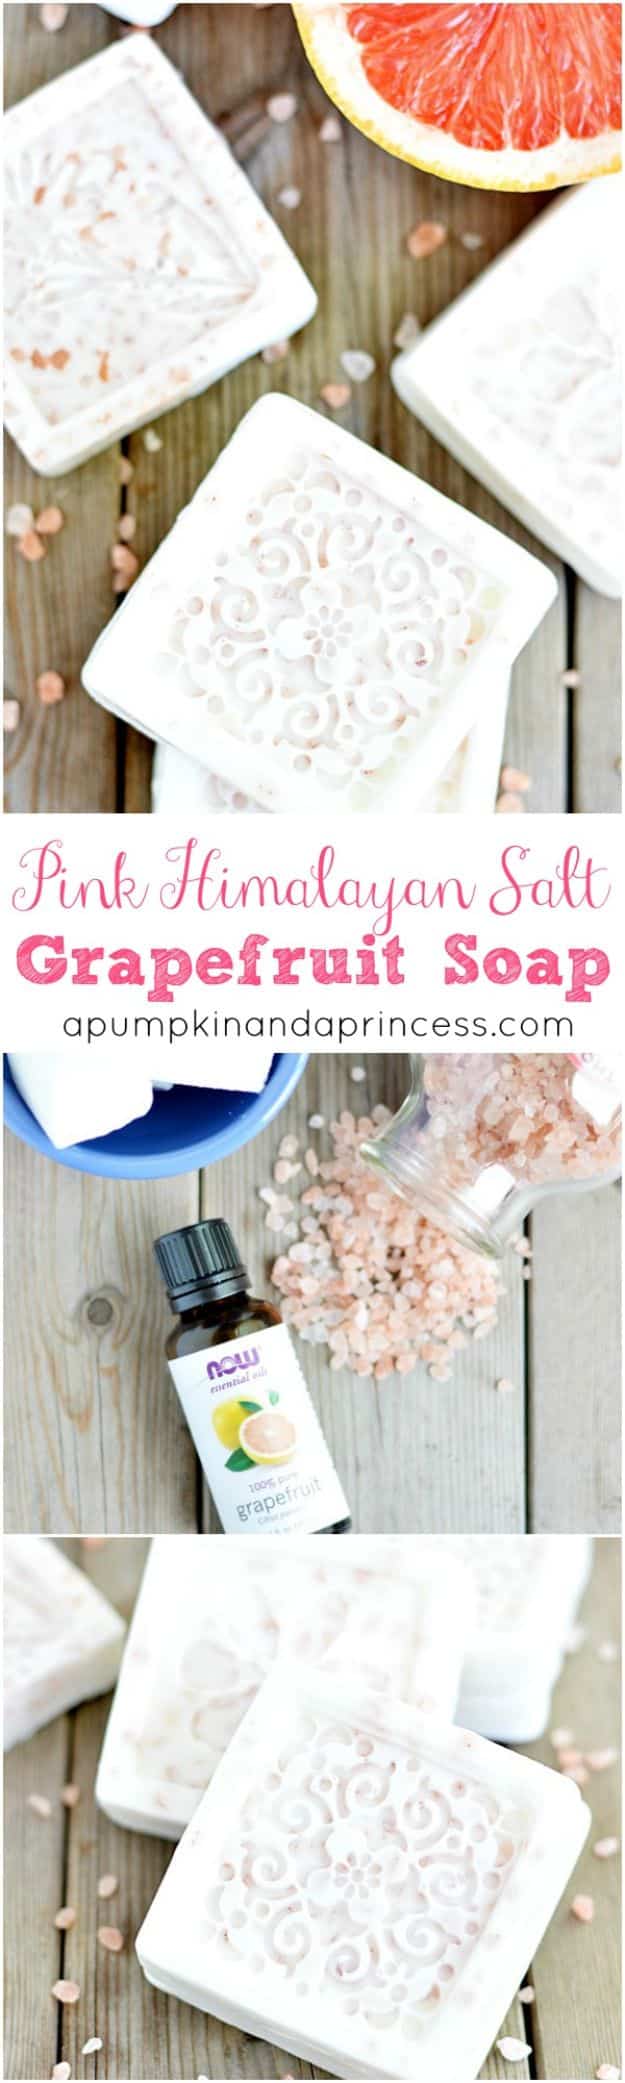 DIY Soap Recipes - Pink Himalayan Salt Grapefruit Soap - Melt and Pour, Homemade Recipe Without Lye - Natural Soap crafts for Kids - Shea Butter, Essential Oils, Easy Ides With 3 Ingredients - soap recipes with step by step tutorials #soap #diygifts